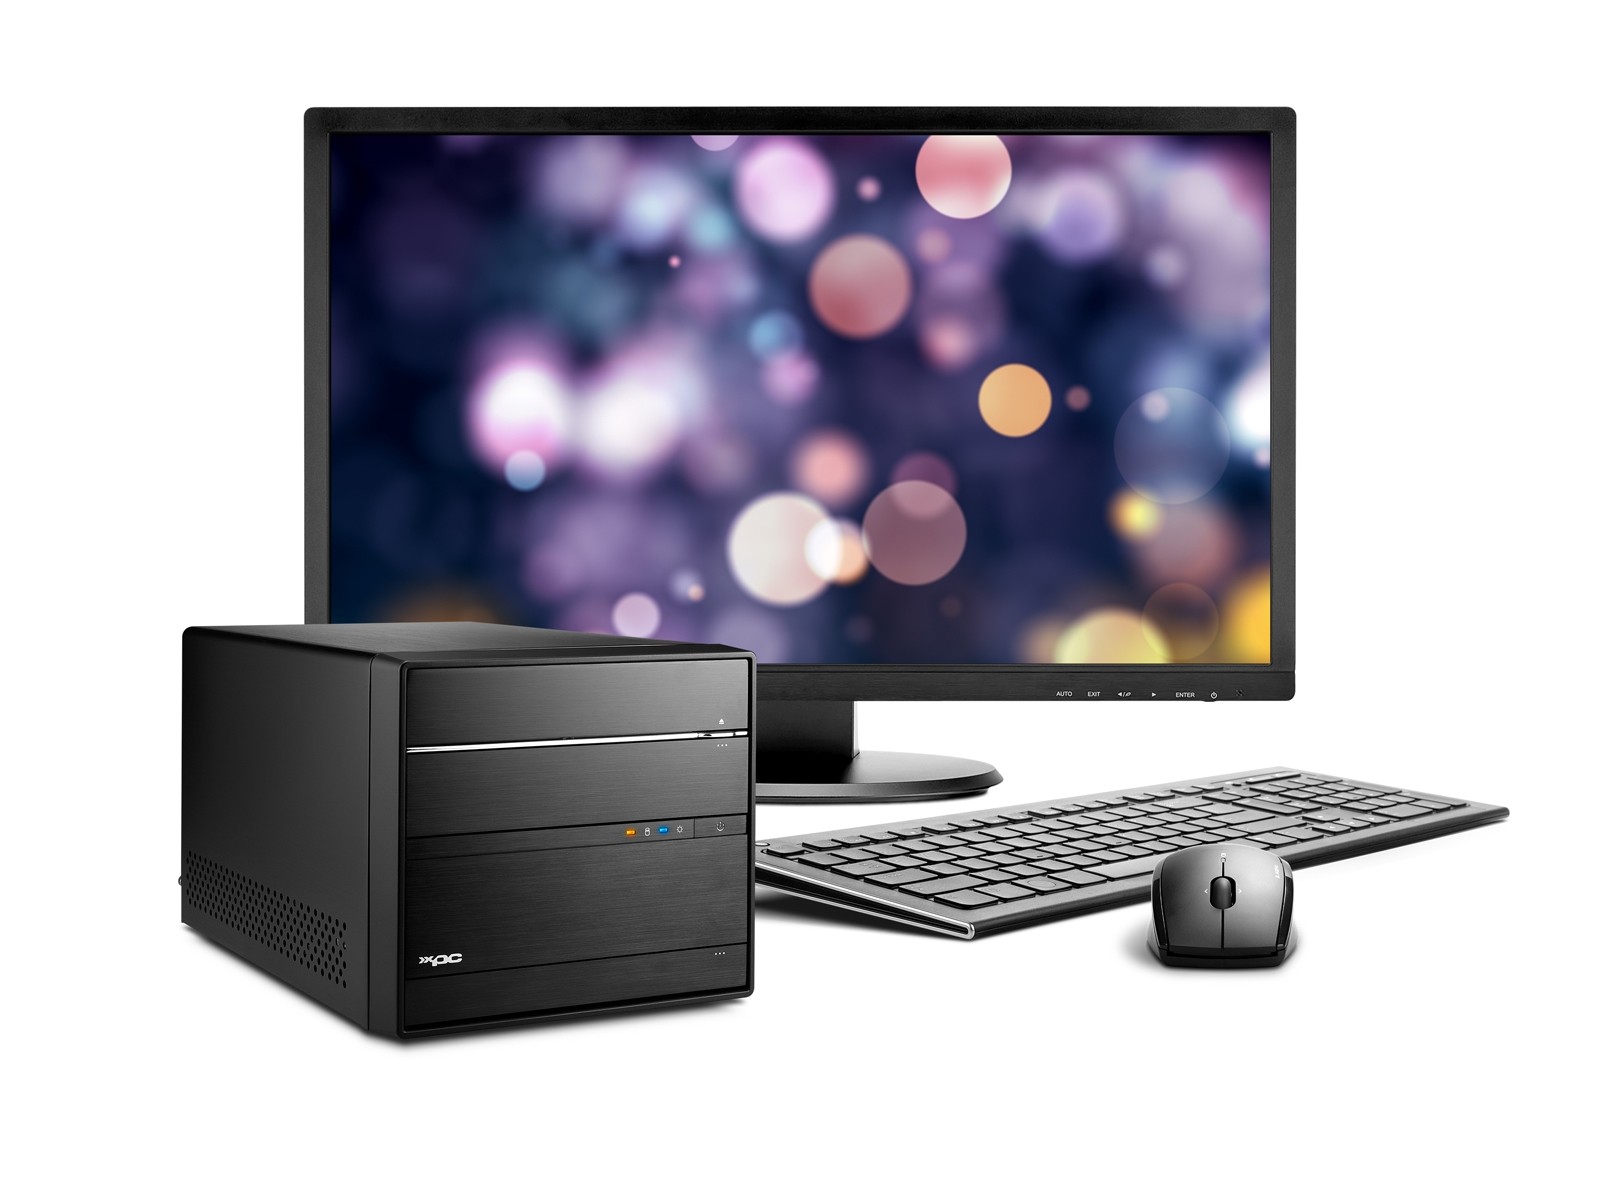 Shuttle Mini PC R6 5700H - Supports 10th/11th generation Intel Core processors and up to three UHD displays 